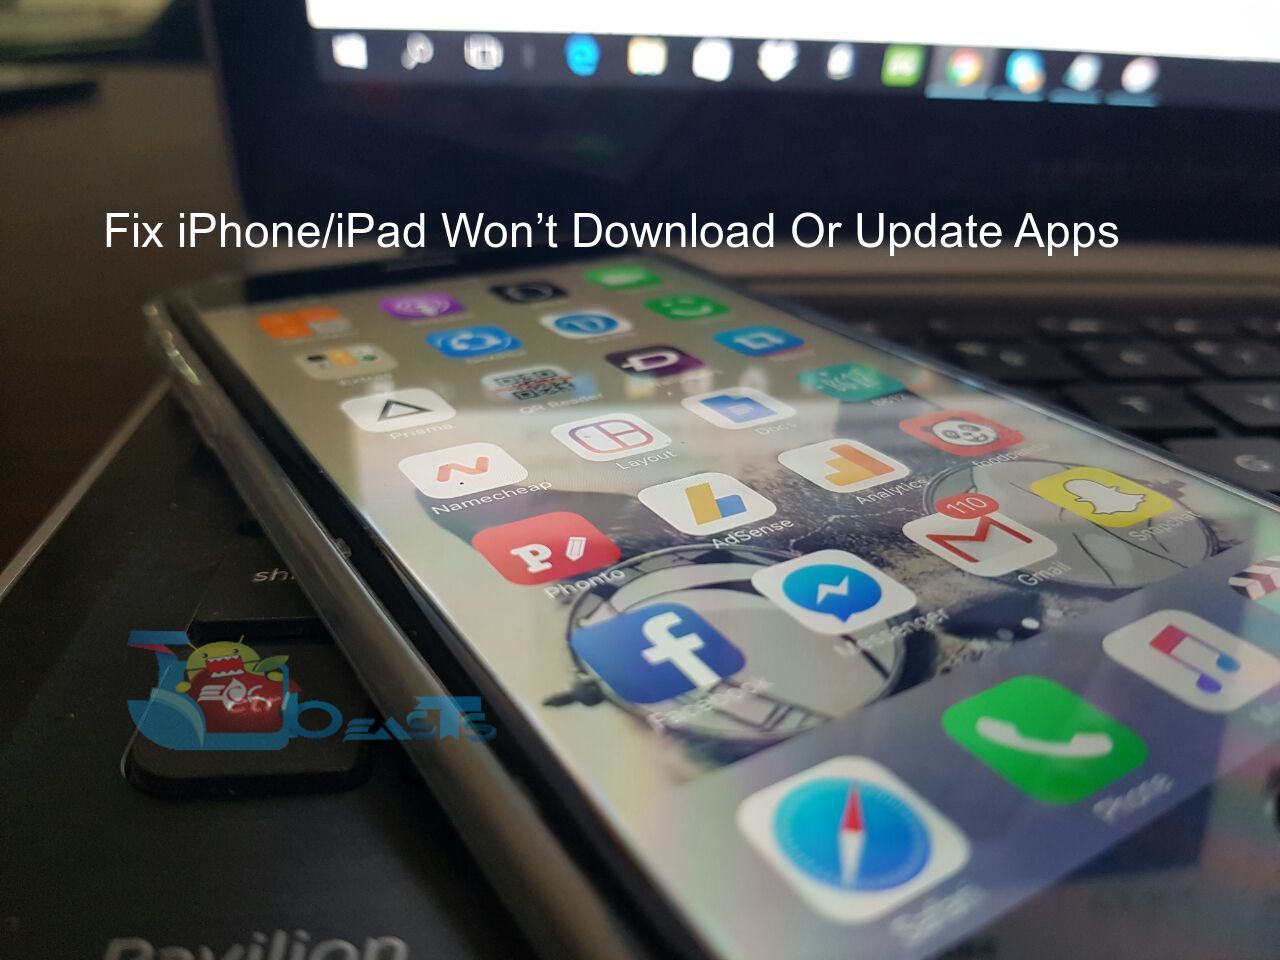 Fix iPhone/iPad Won’t Download Or Update Apps